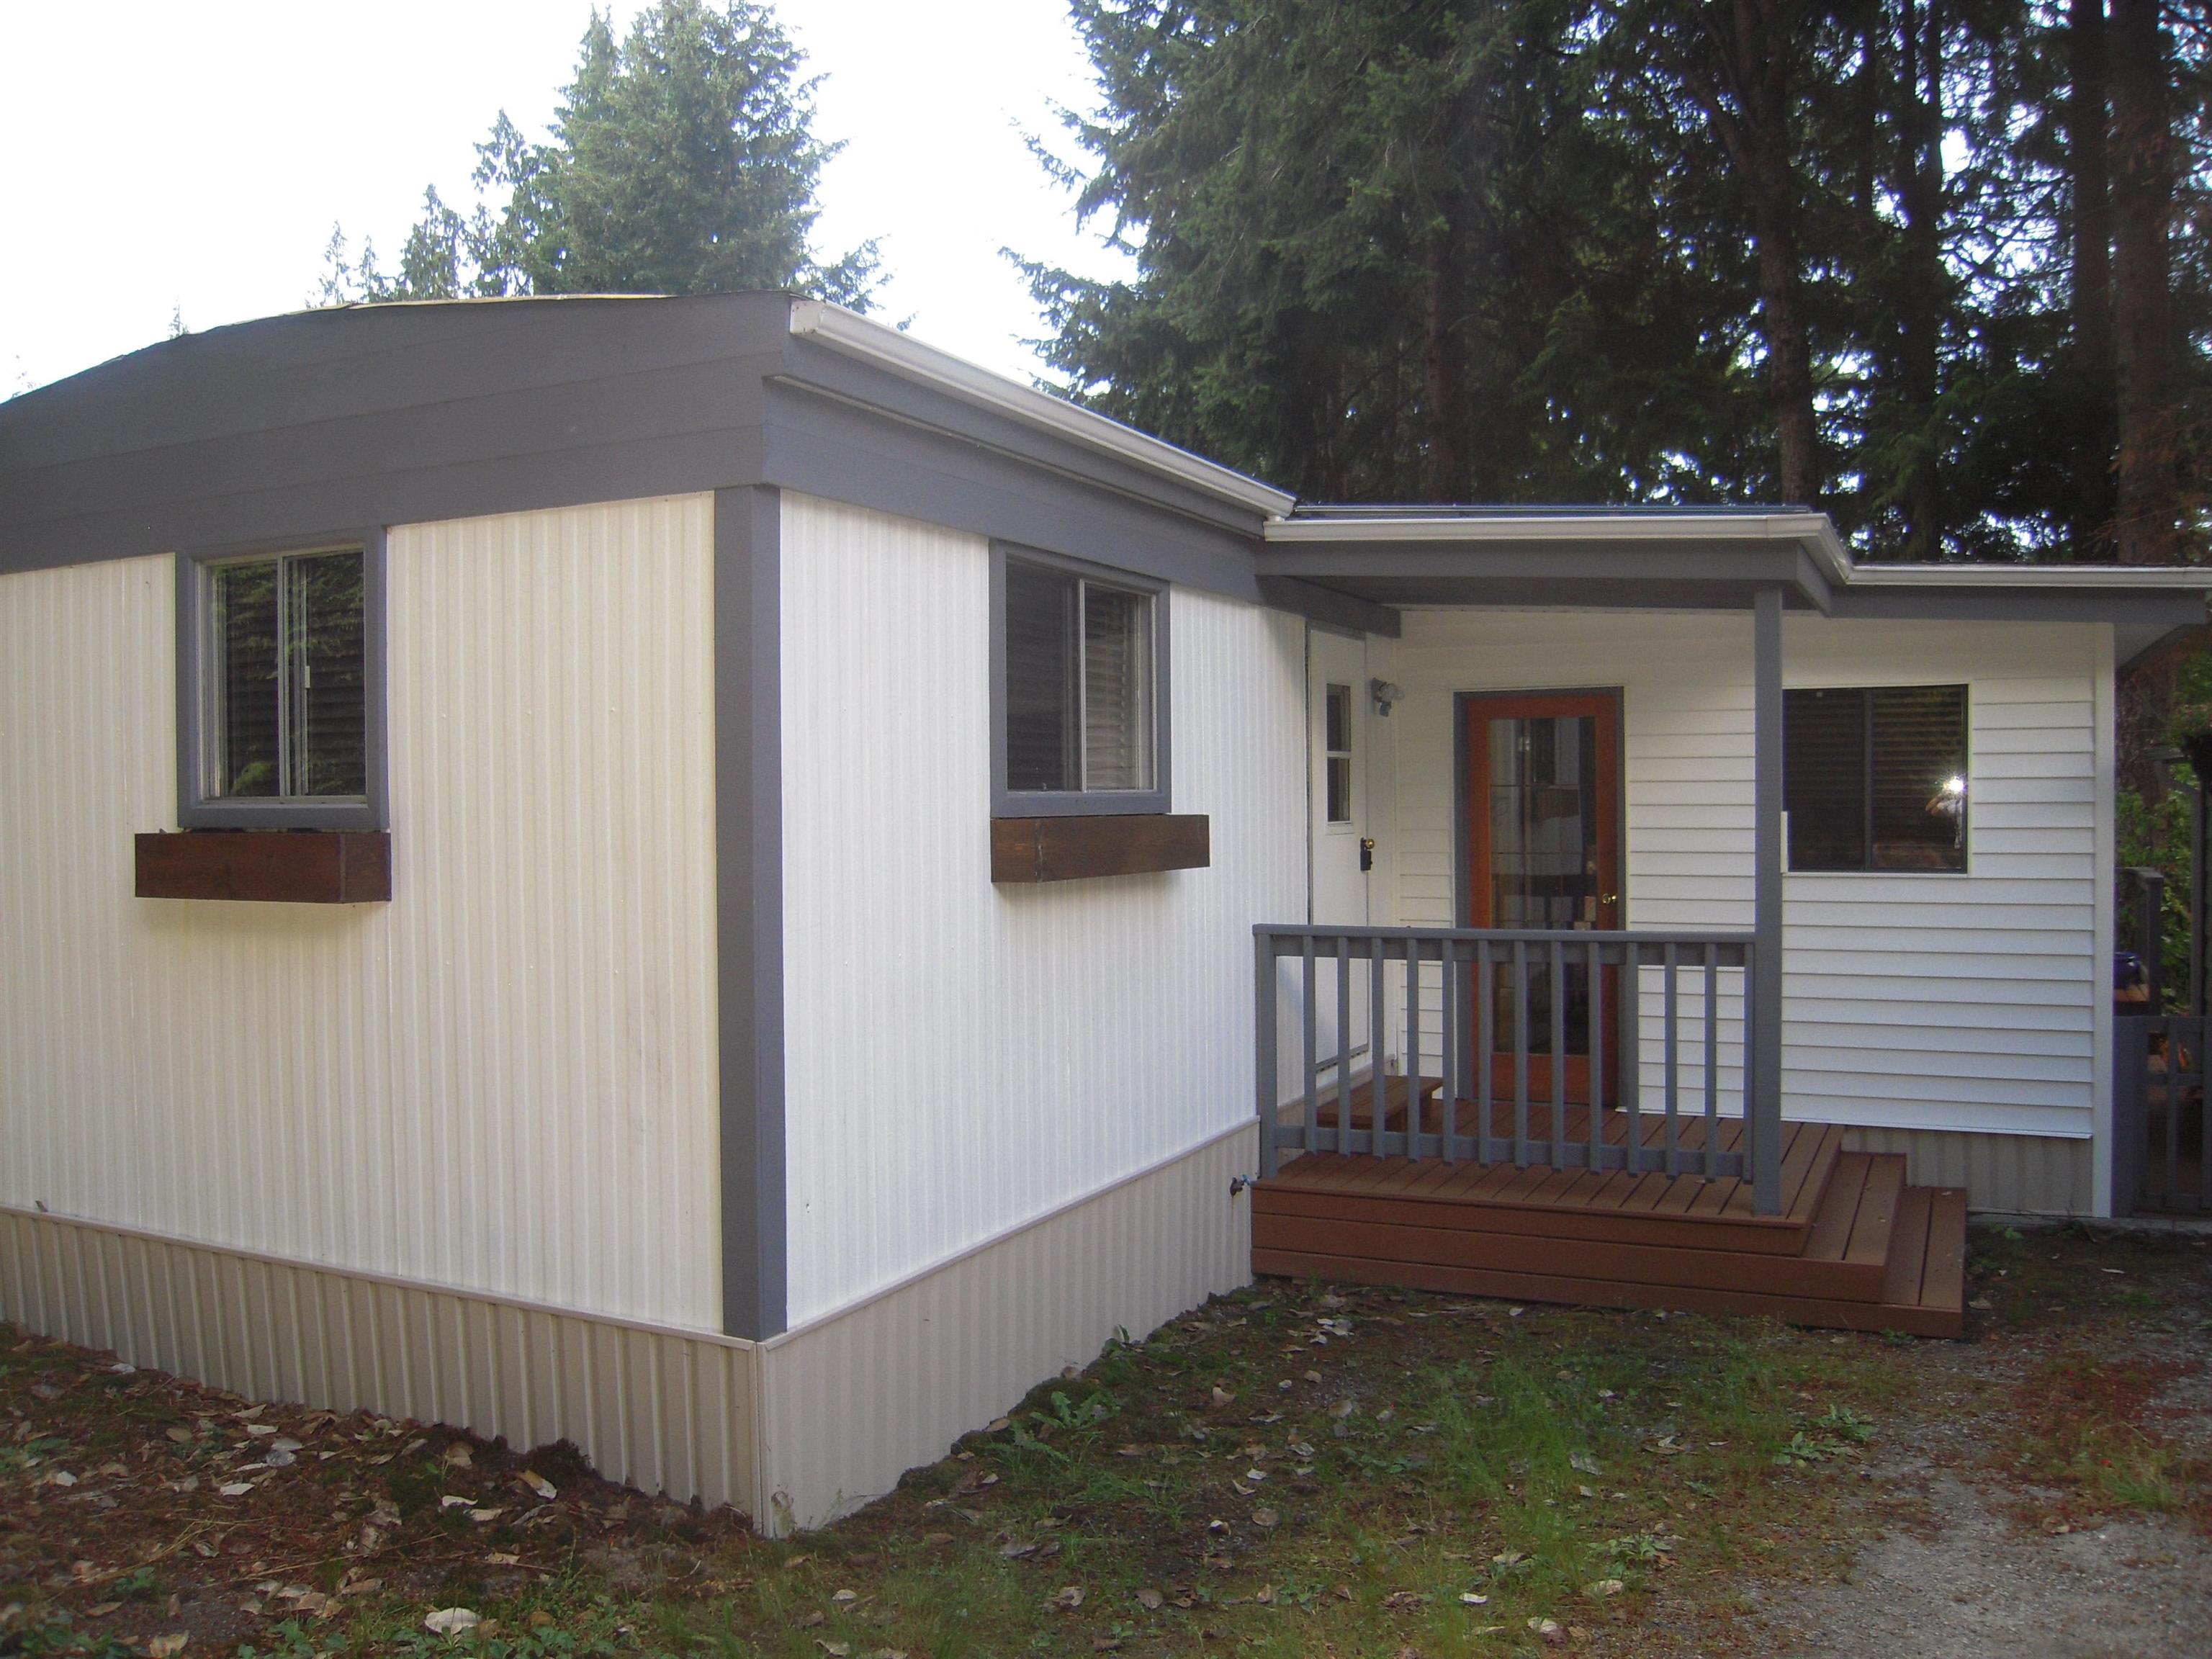 Very nicely maintained single wide in very quiet Selma Park Mobile Home Park.  Park is age restricted to 55+.  Home features a good quality addition and a cozy wood-burning stove in the living room.  Location is close to beaches, public transit and Sechelt Village.  Ready to move in.